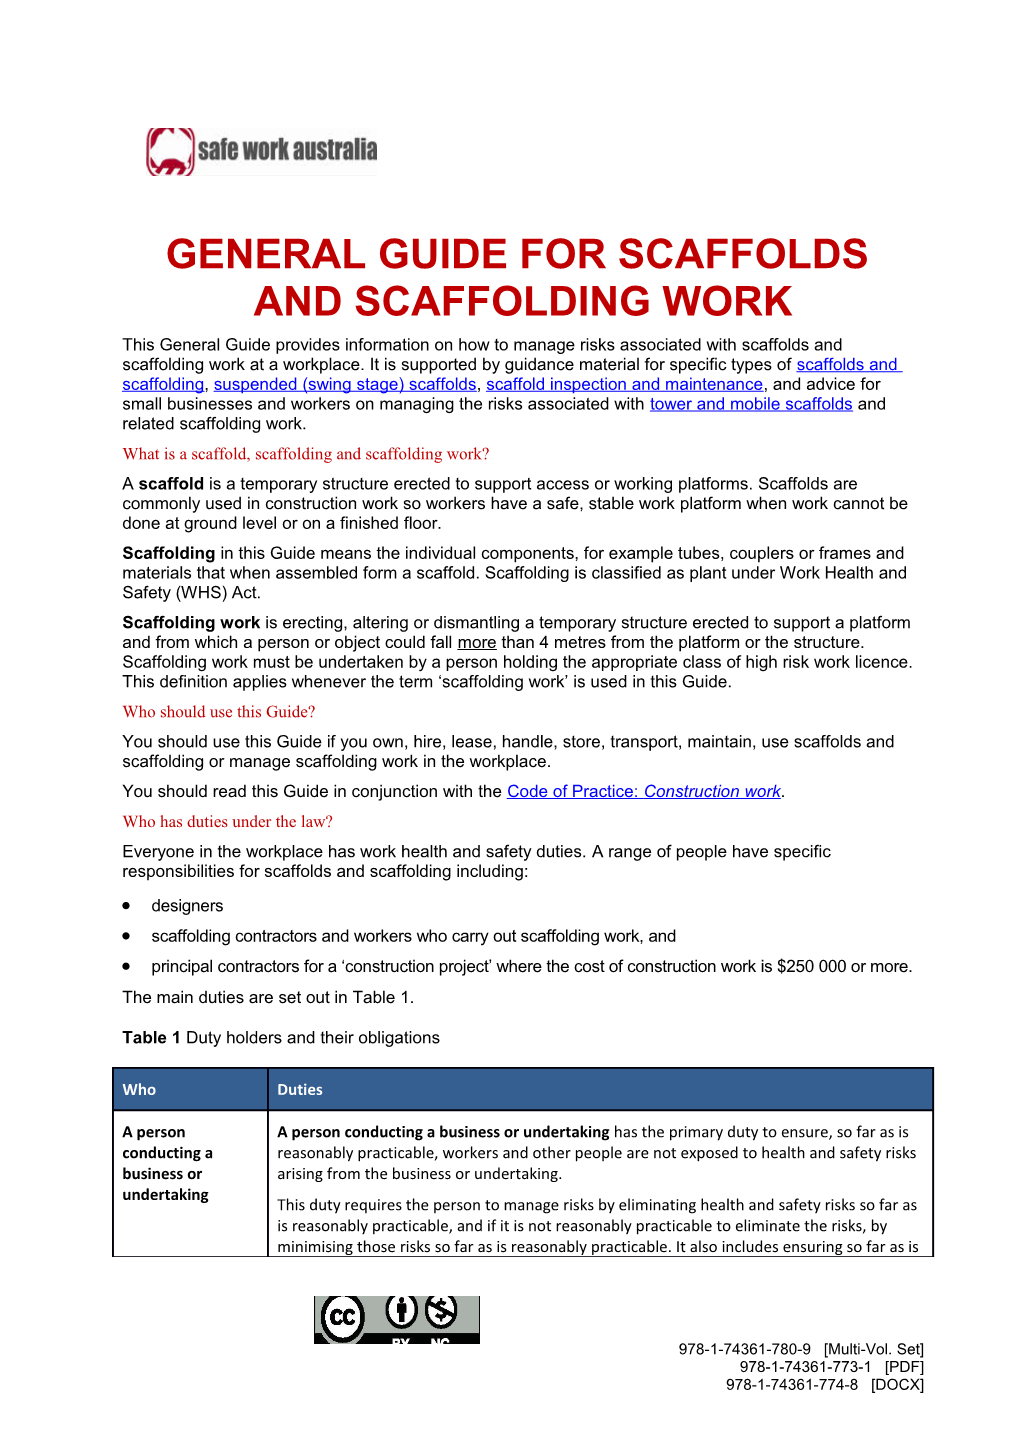 2. General Guide for Scaffolds and Scaffolding Work